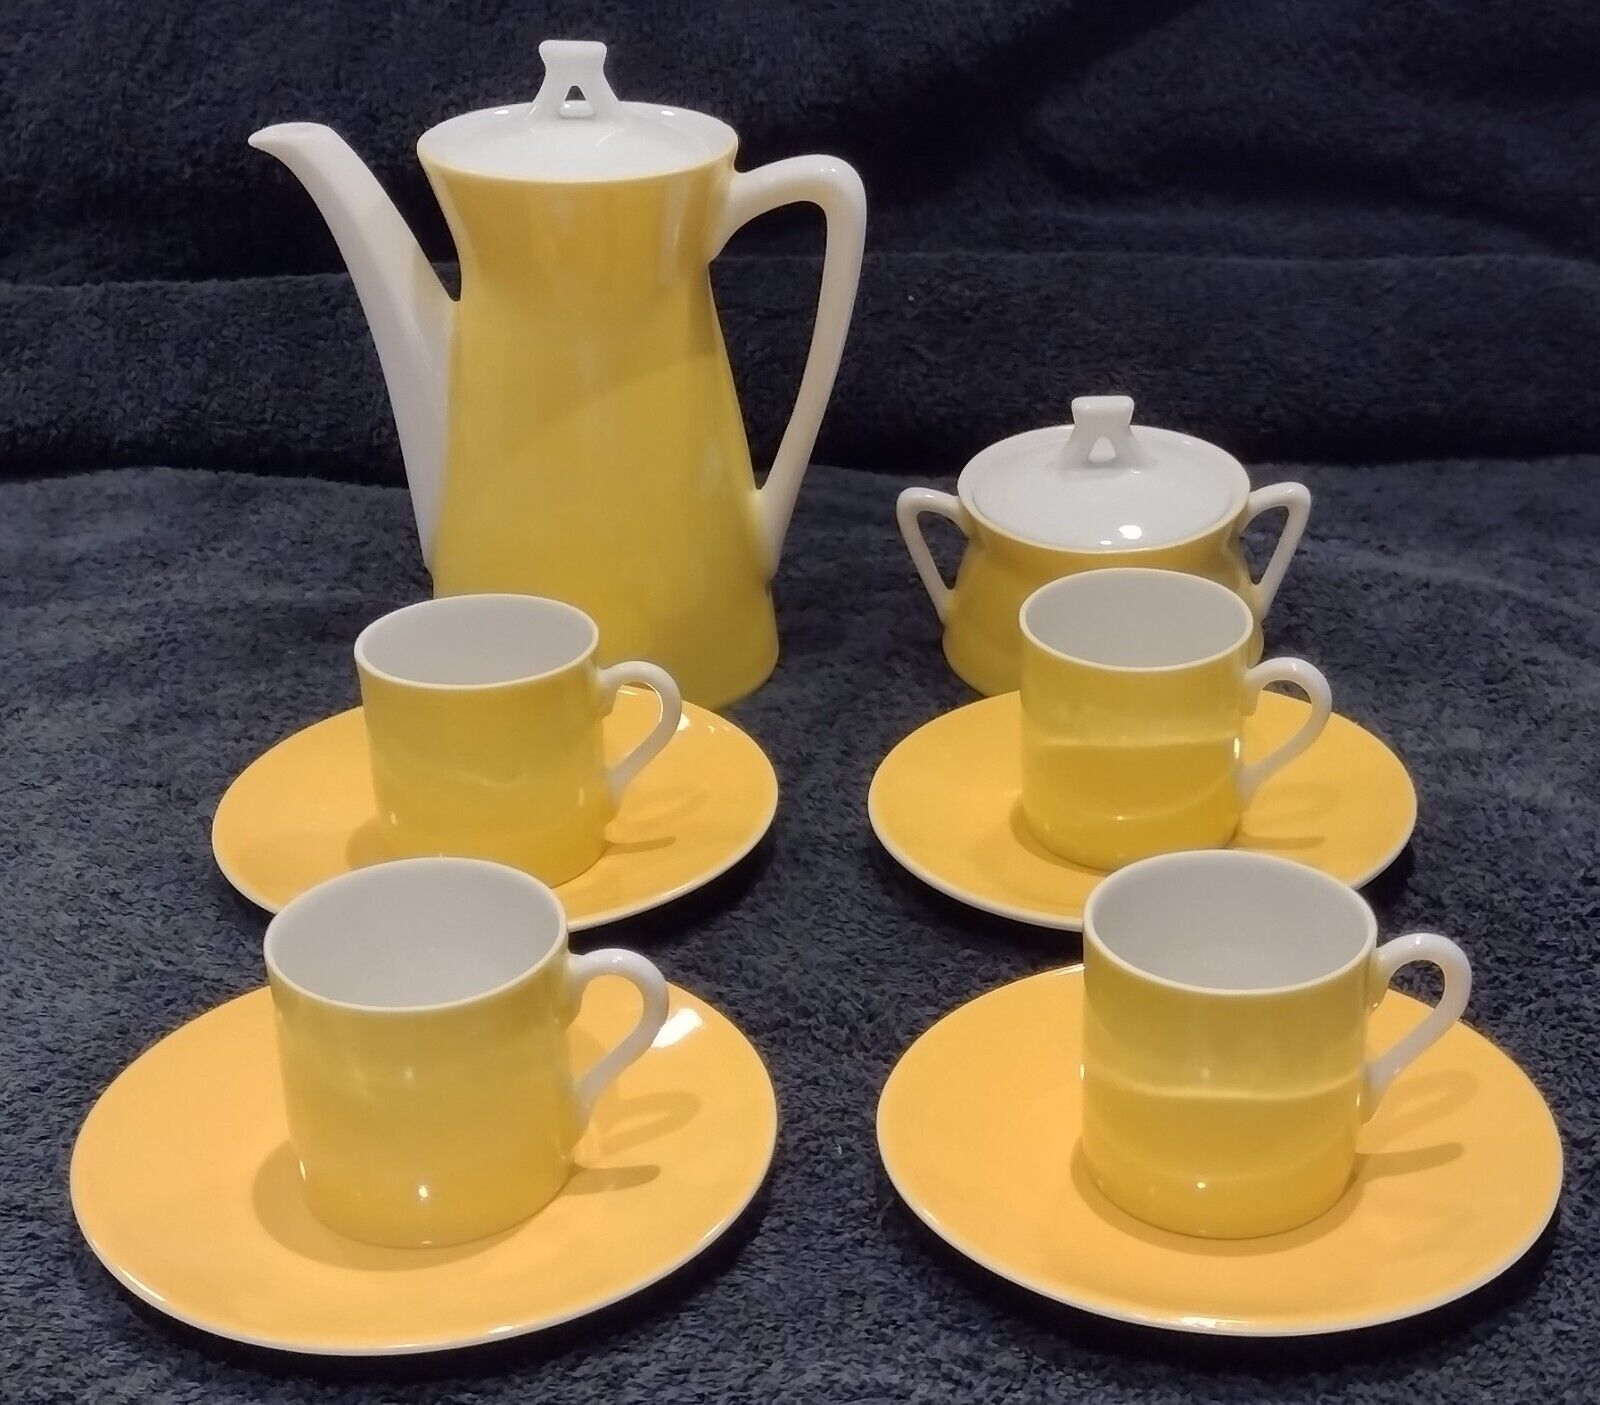 Vintage Bristol Founded 1652 England Cappuccino Set.